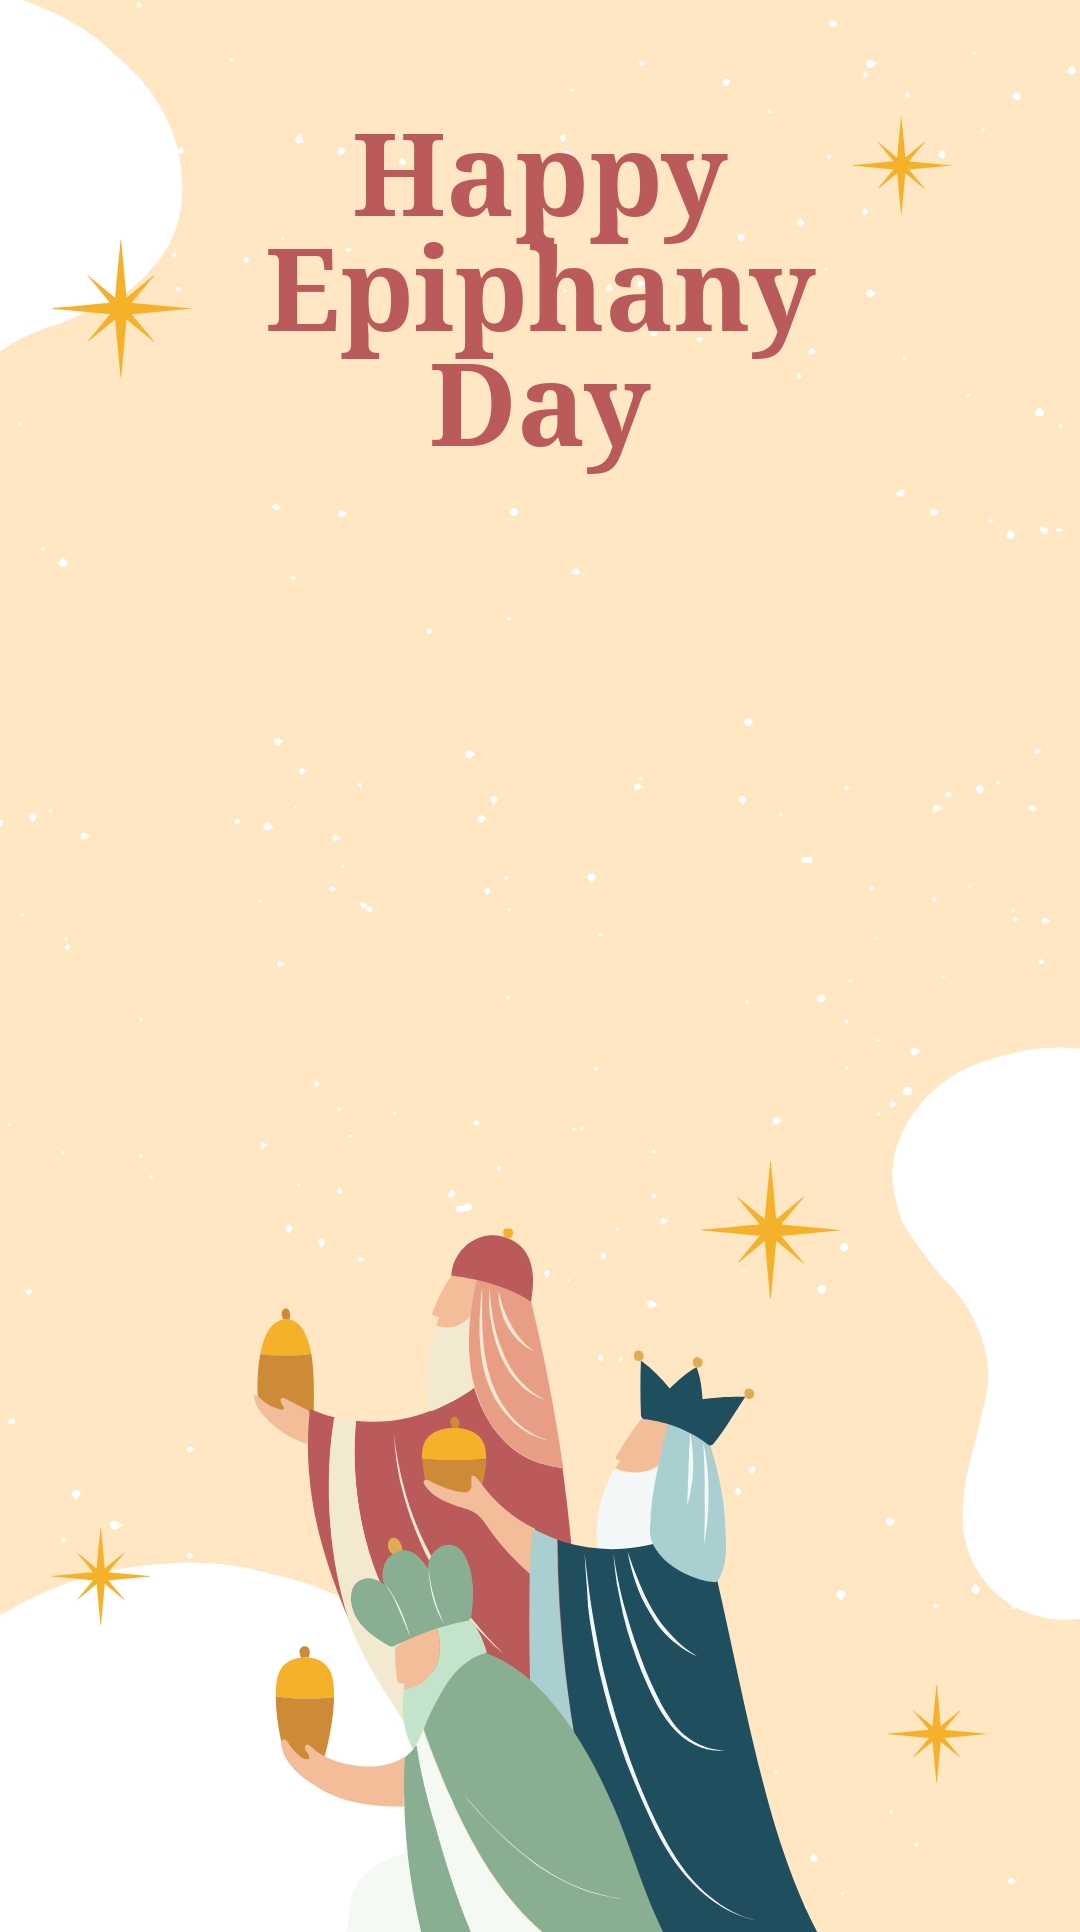 Happy Epiphany Day Snapchat Geofilter Template